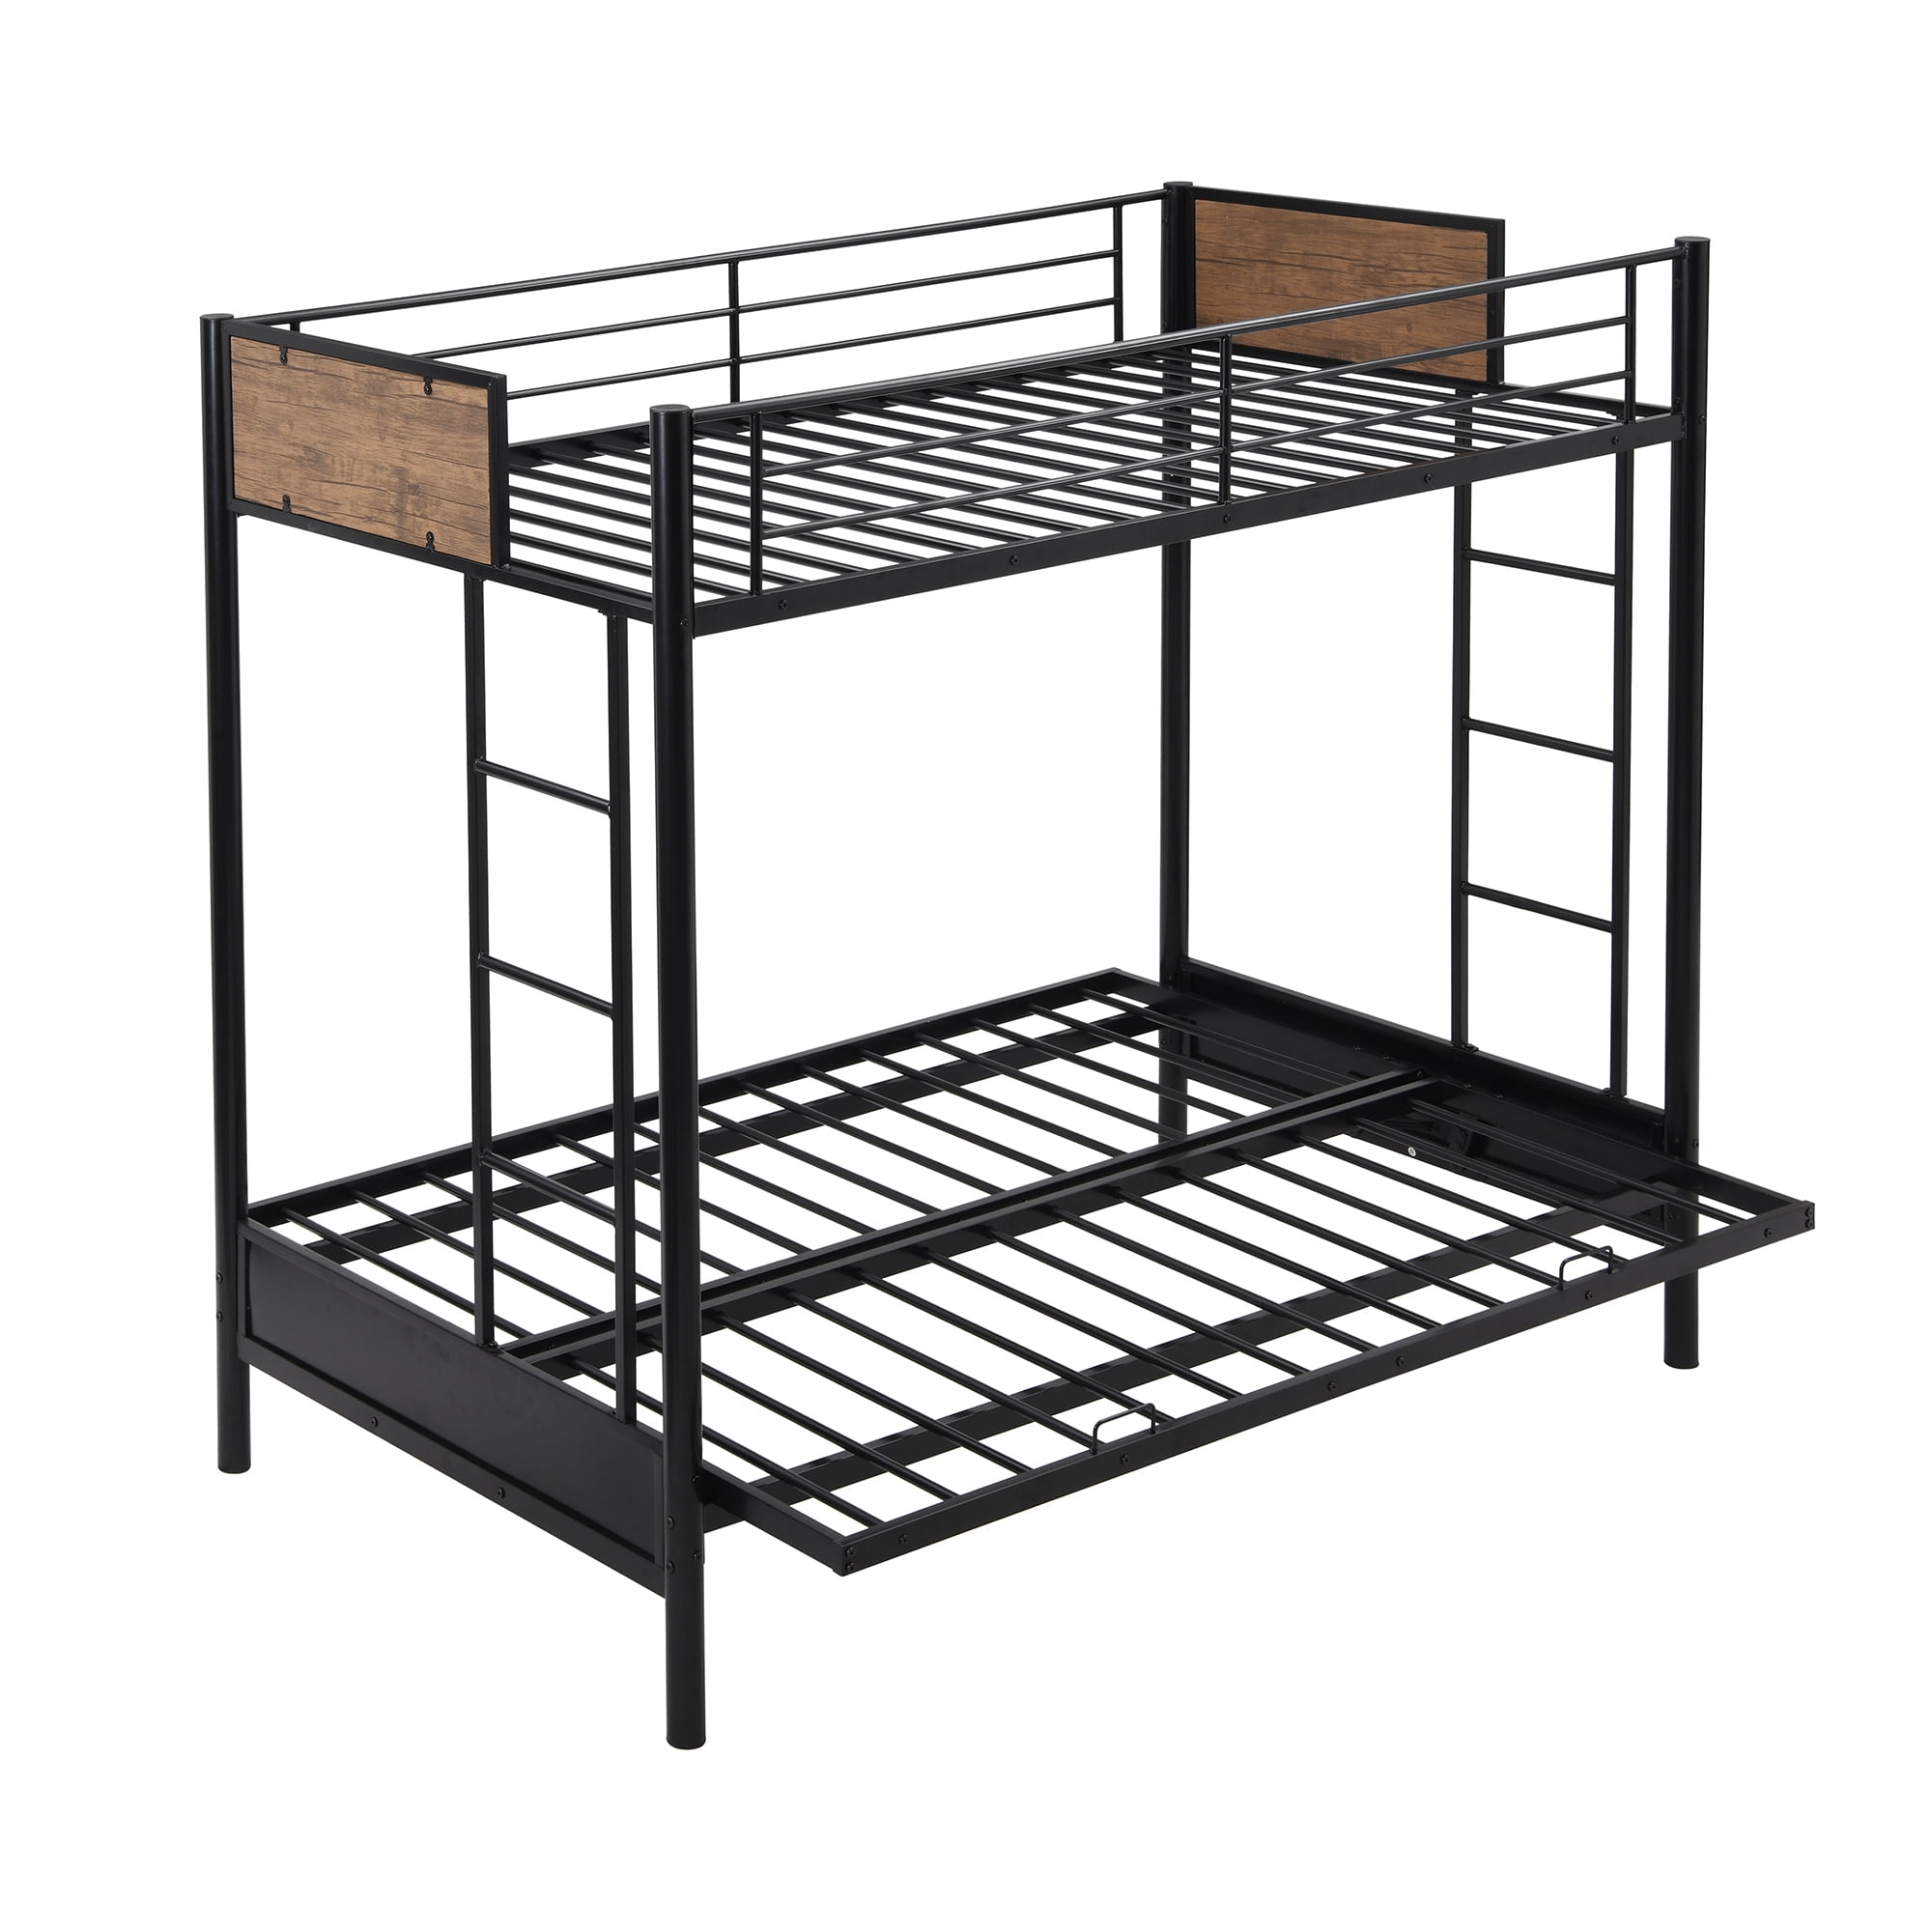 Rustic Twin Over Full Metal Bunk Bed, Twin Over Full Futon Metal Bunk Bed Assembly Instructions